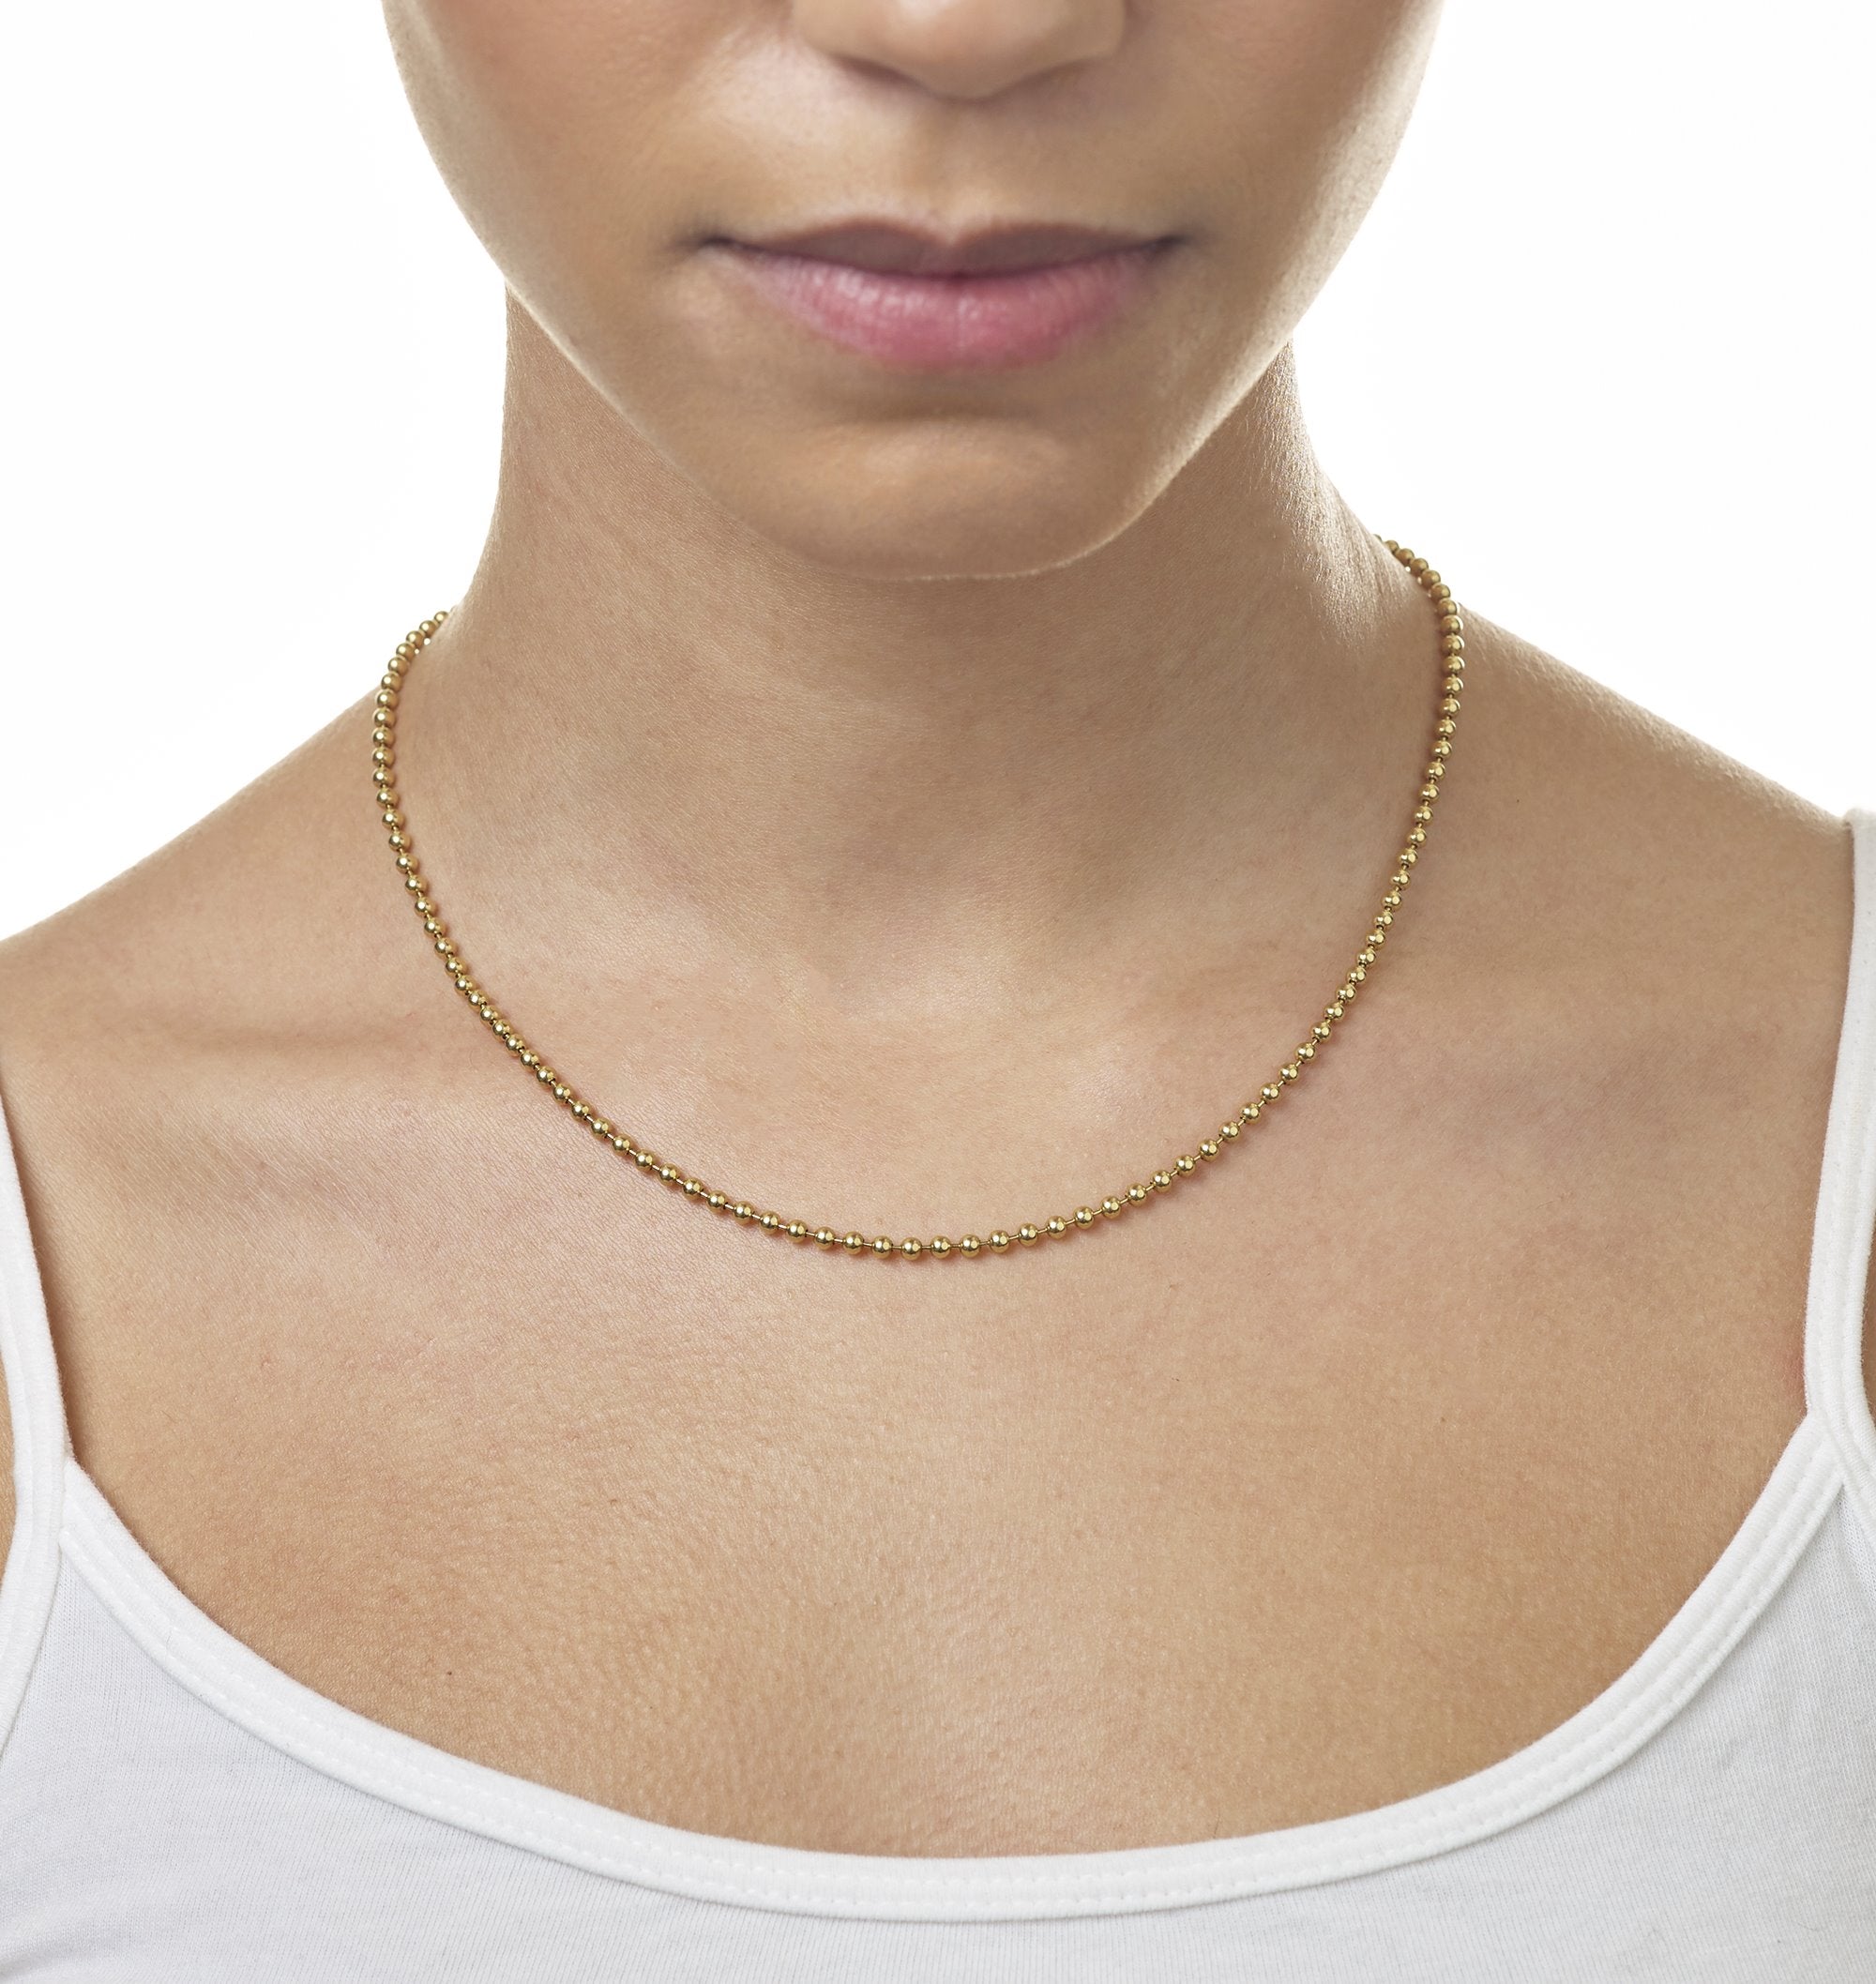 Cable Chain | Gold Chain | Necklace Chain | Pendant Chain 14K Pink Gold / 16in by Helen Ficalora